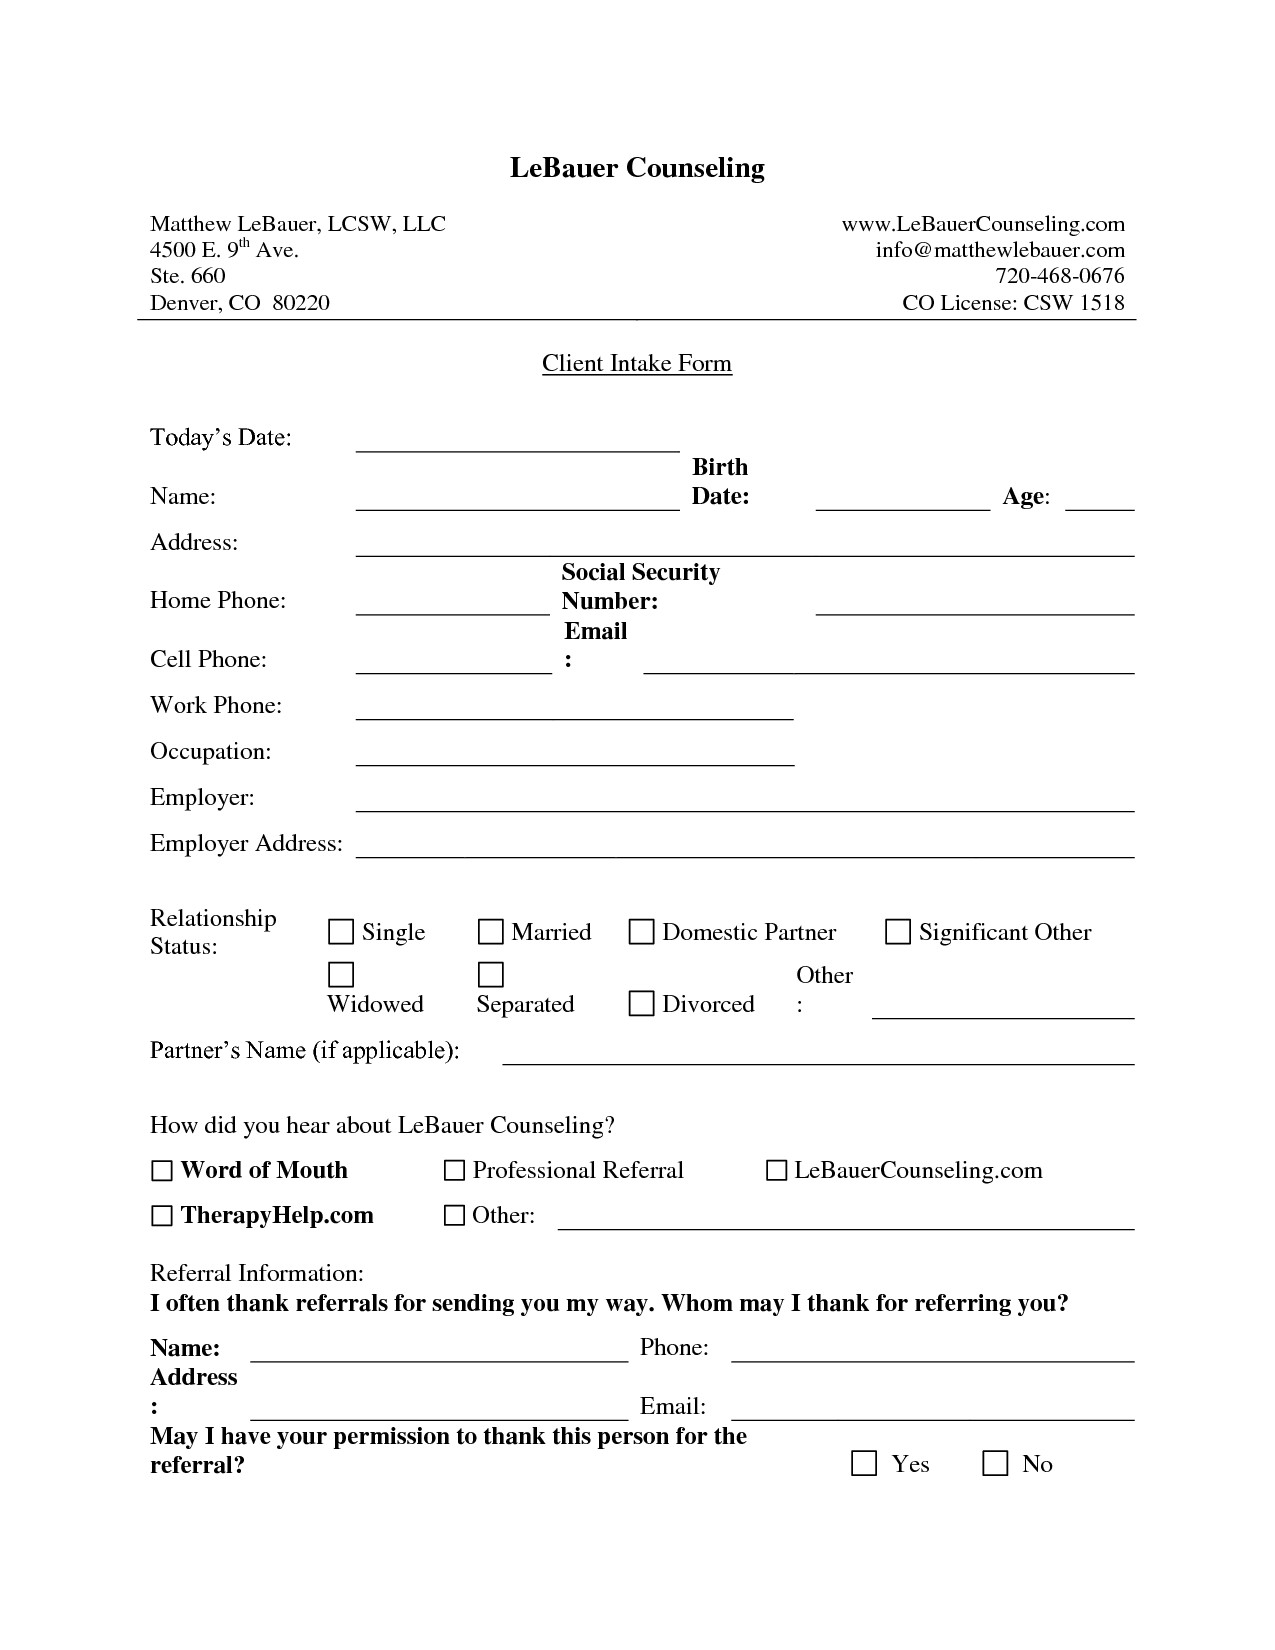 New Client Intake Form Template fOGiid Clipart Kid